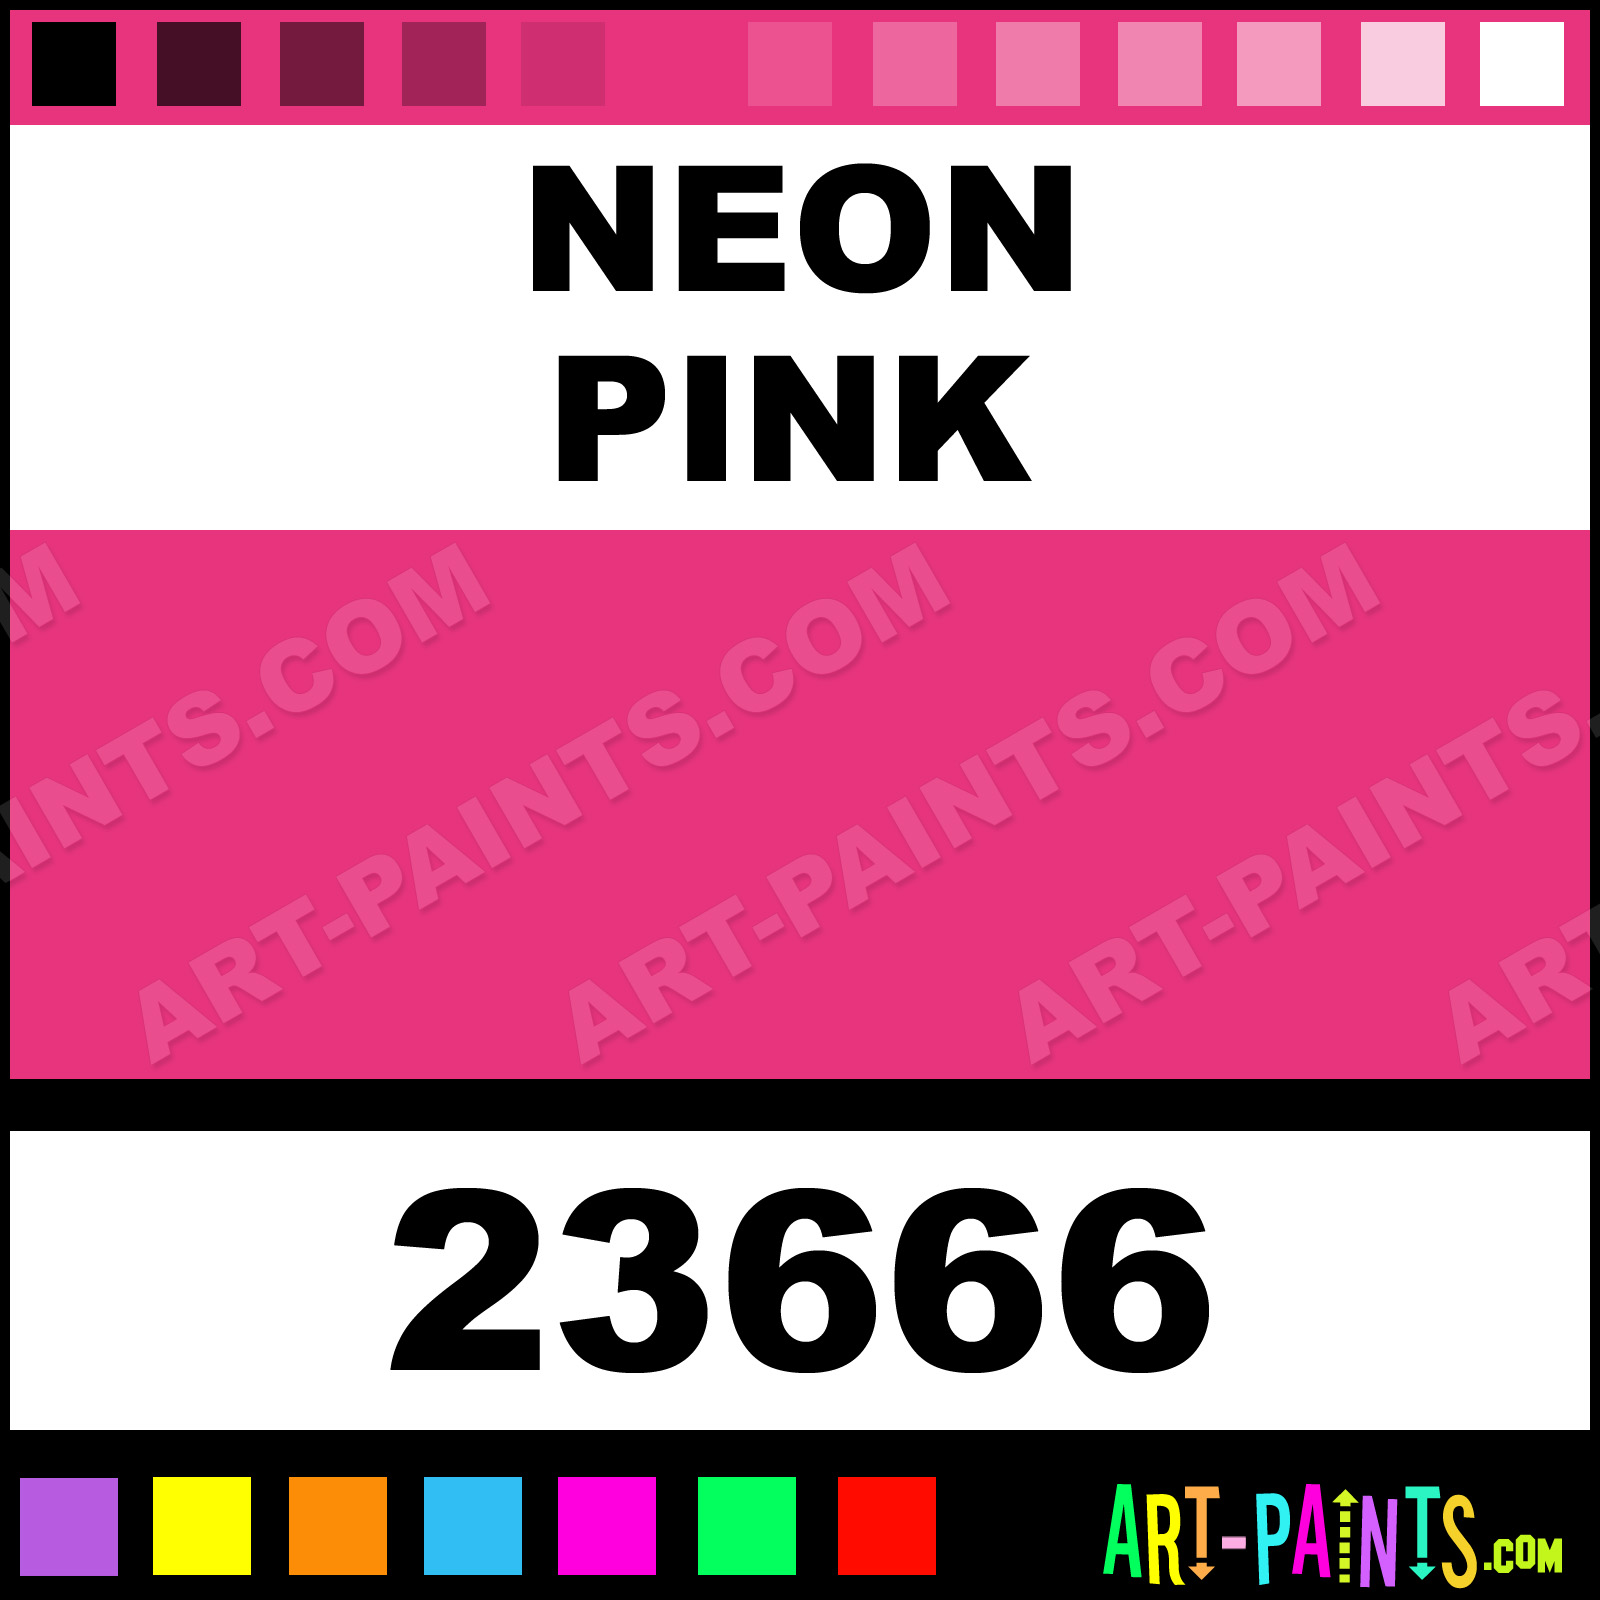 Neon Pink xlg